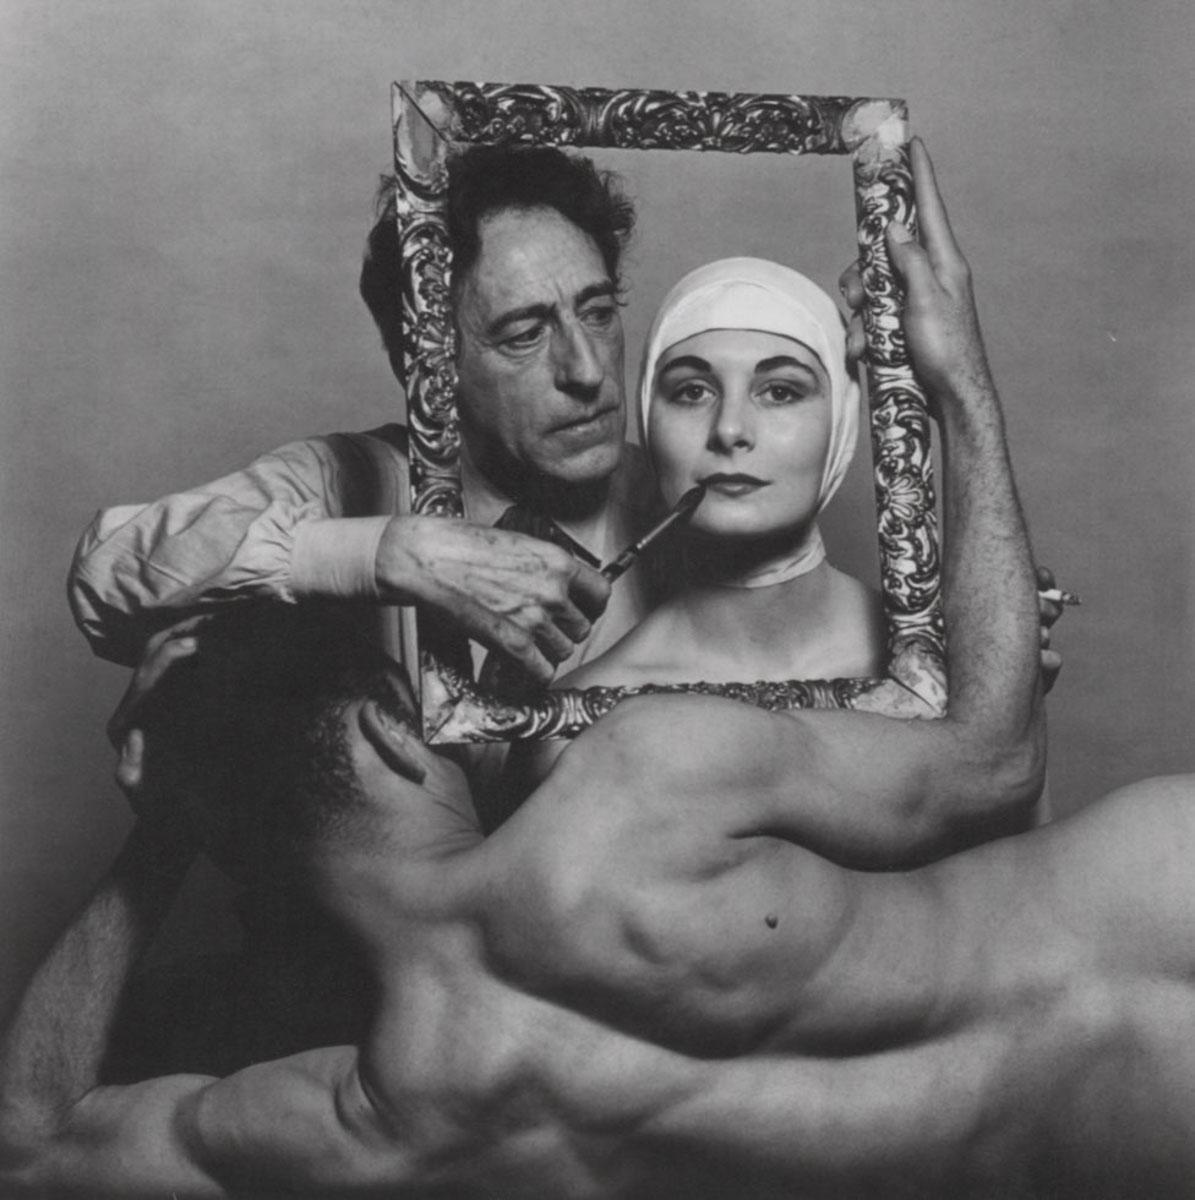 Philippe Halsman Portrait Photograph - French poet, artist, and filmmaker Jean Cocteau with actress Ricki Soma